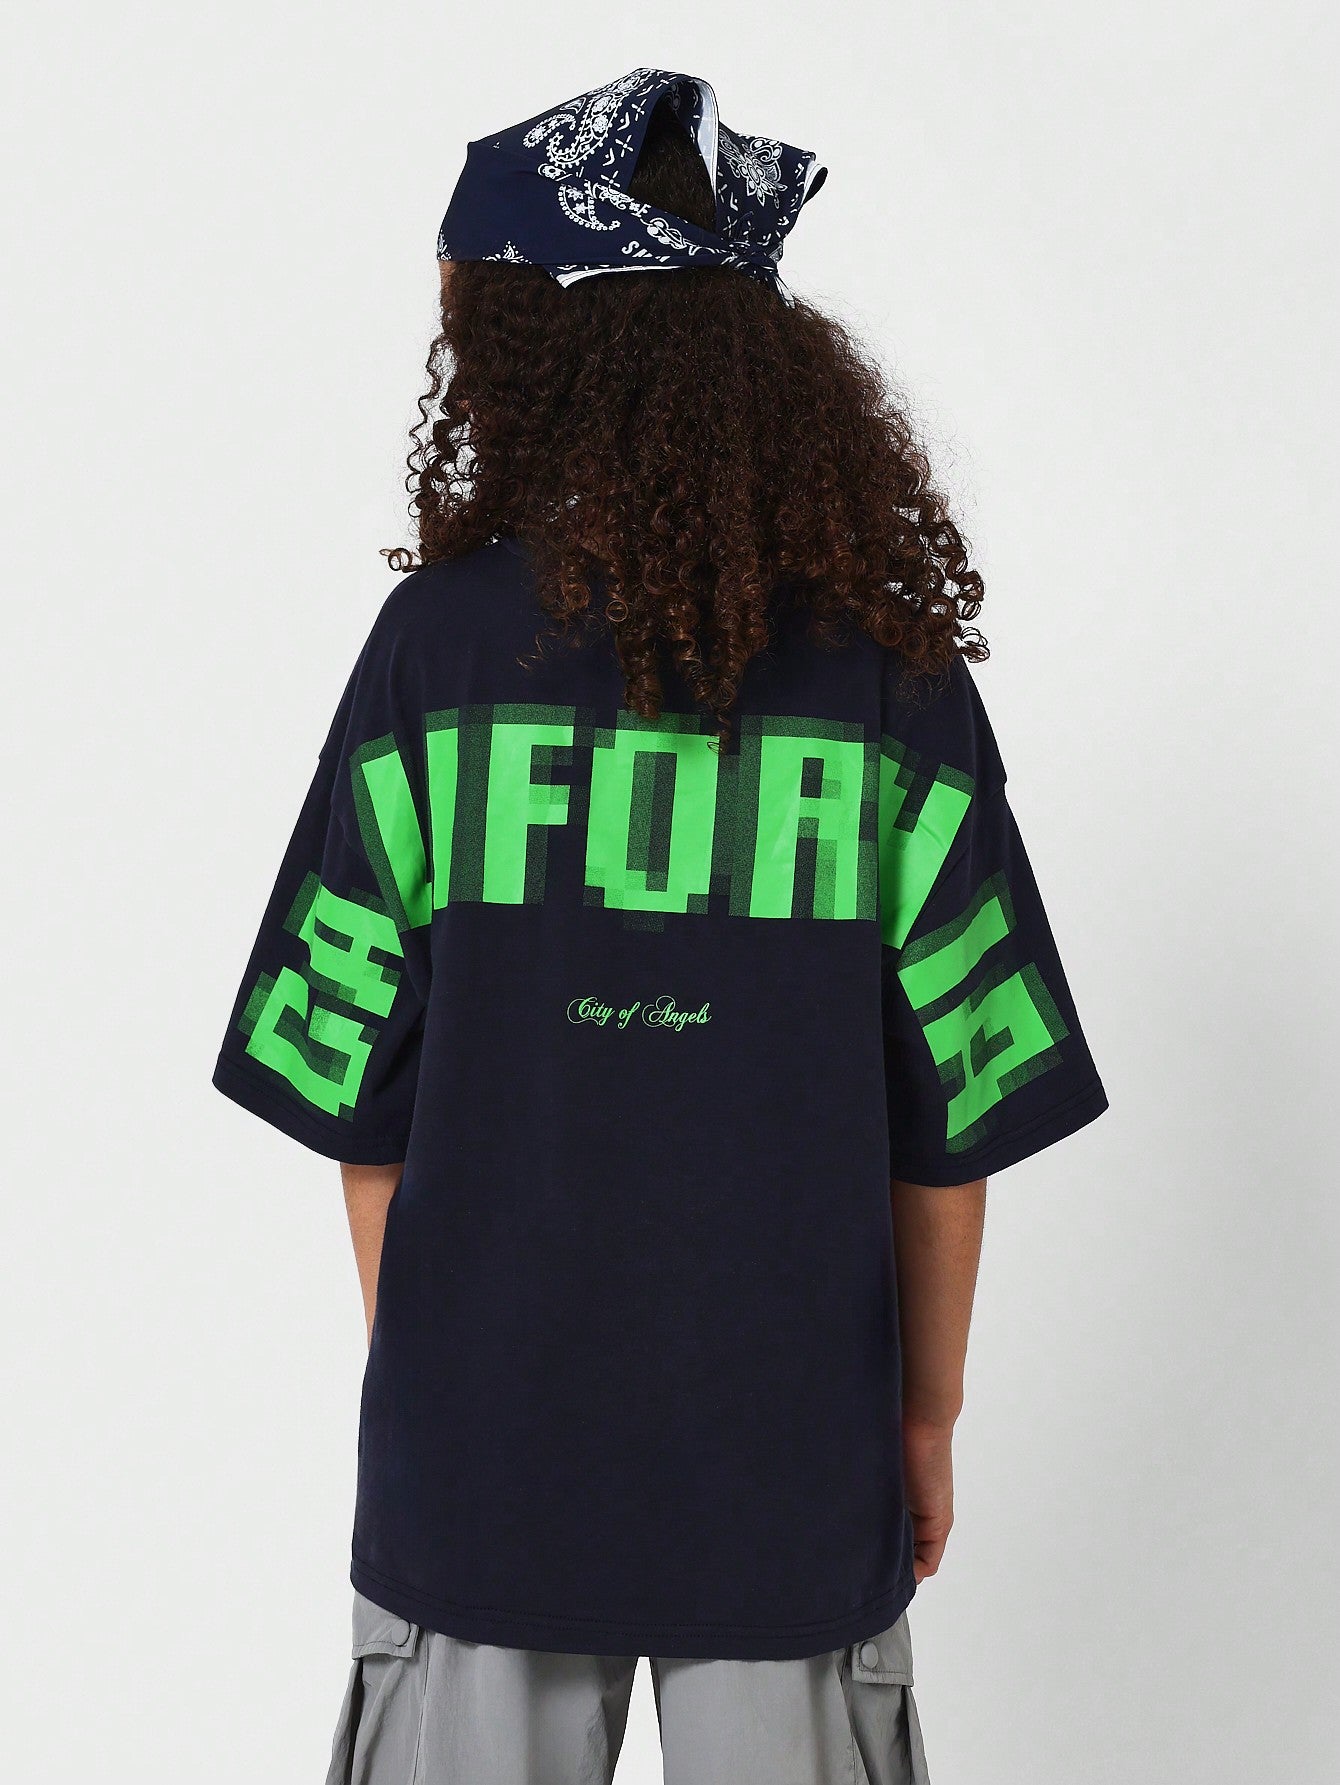 Kids Unisex Oversized Fit Tee With Back Print Back To School